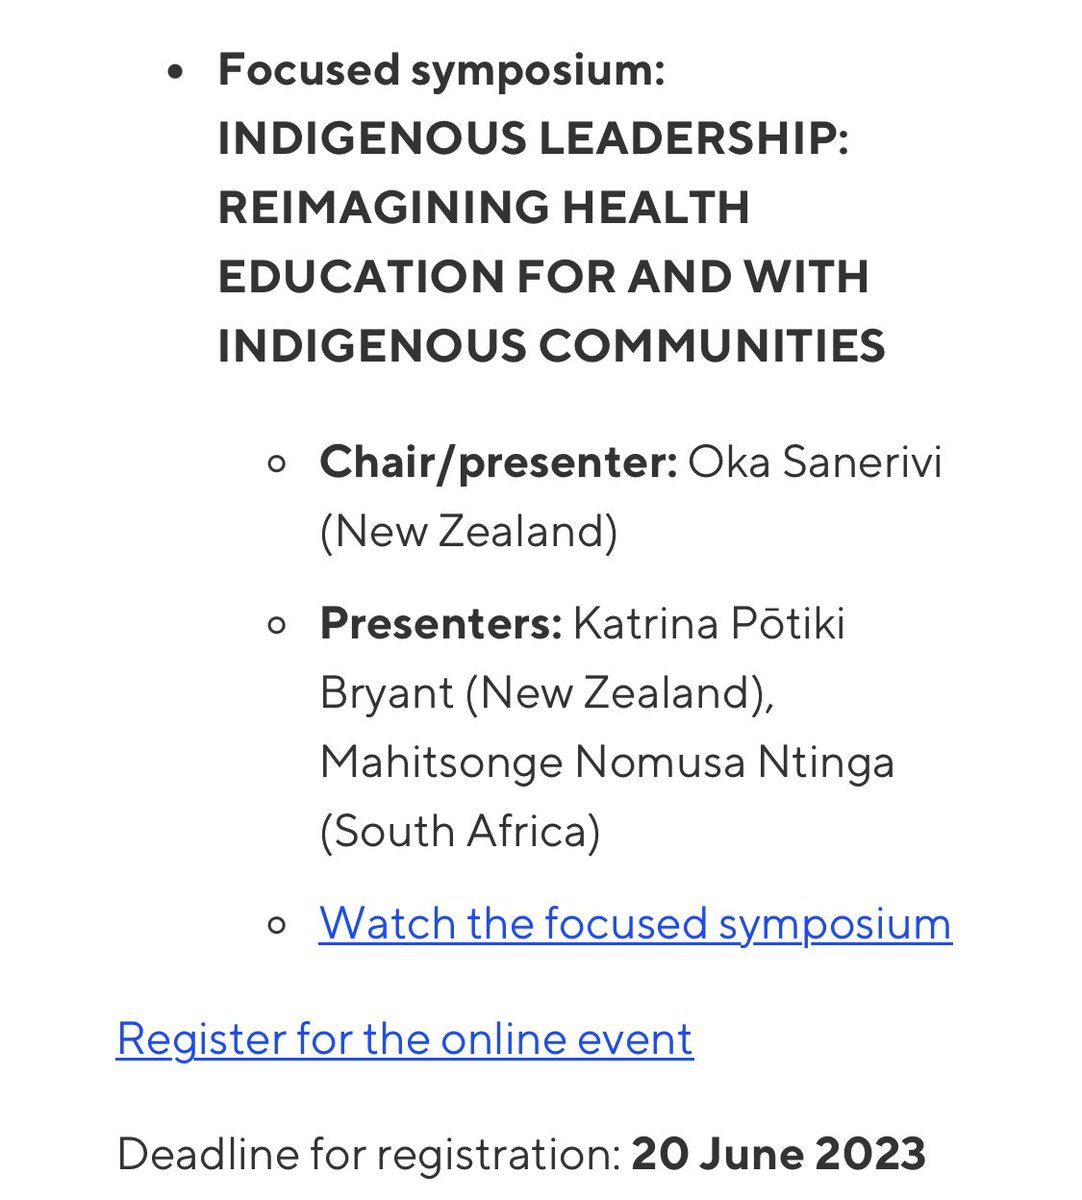 Unable to attend #WorldPhysio2023 - Join the online event. Access recordings & chat with speakers

3 sessions are open access as a teaser (follow the 🔗) 

The indigenous leadership FS is the most impactful conference session I have ever attended - anywhere. It is a must see